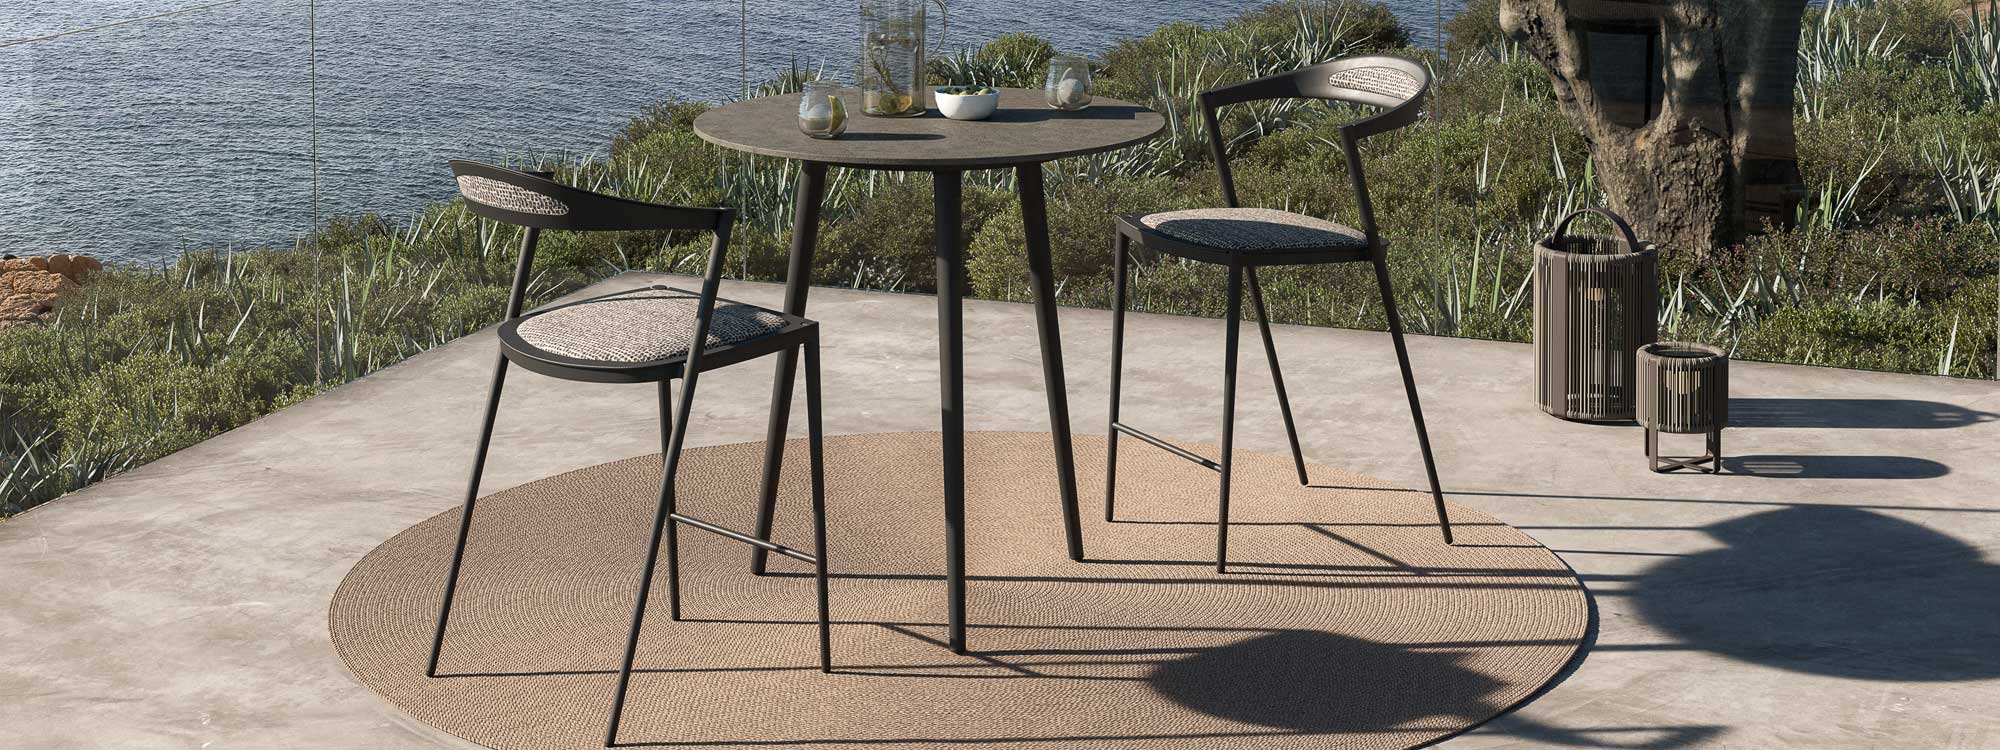 Image of Royal Botania Styletto high bar table and bar stools on sunny terrace overlooking the sea